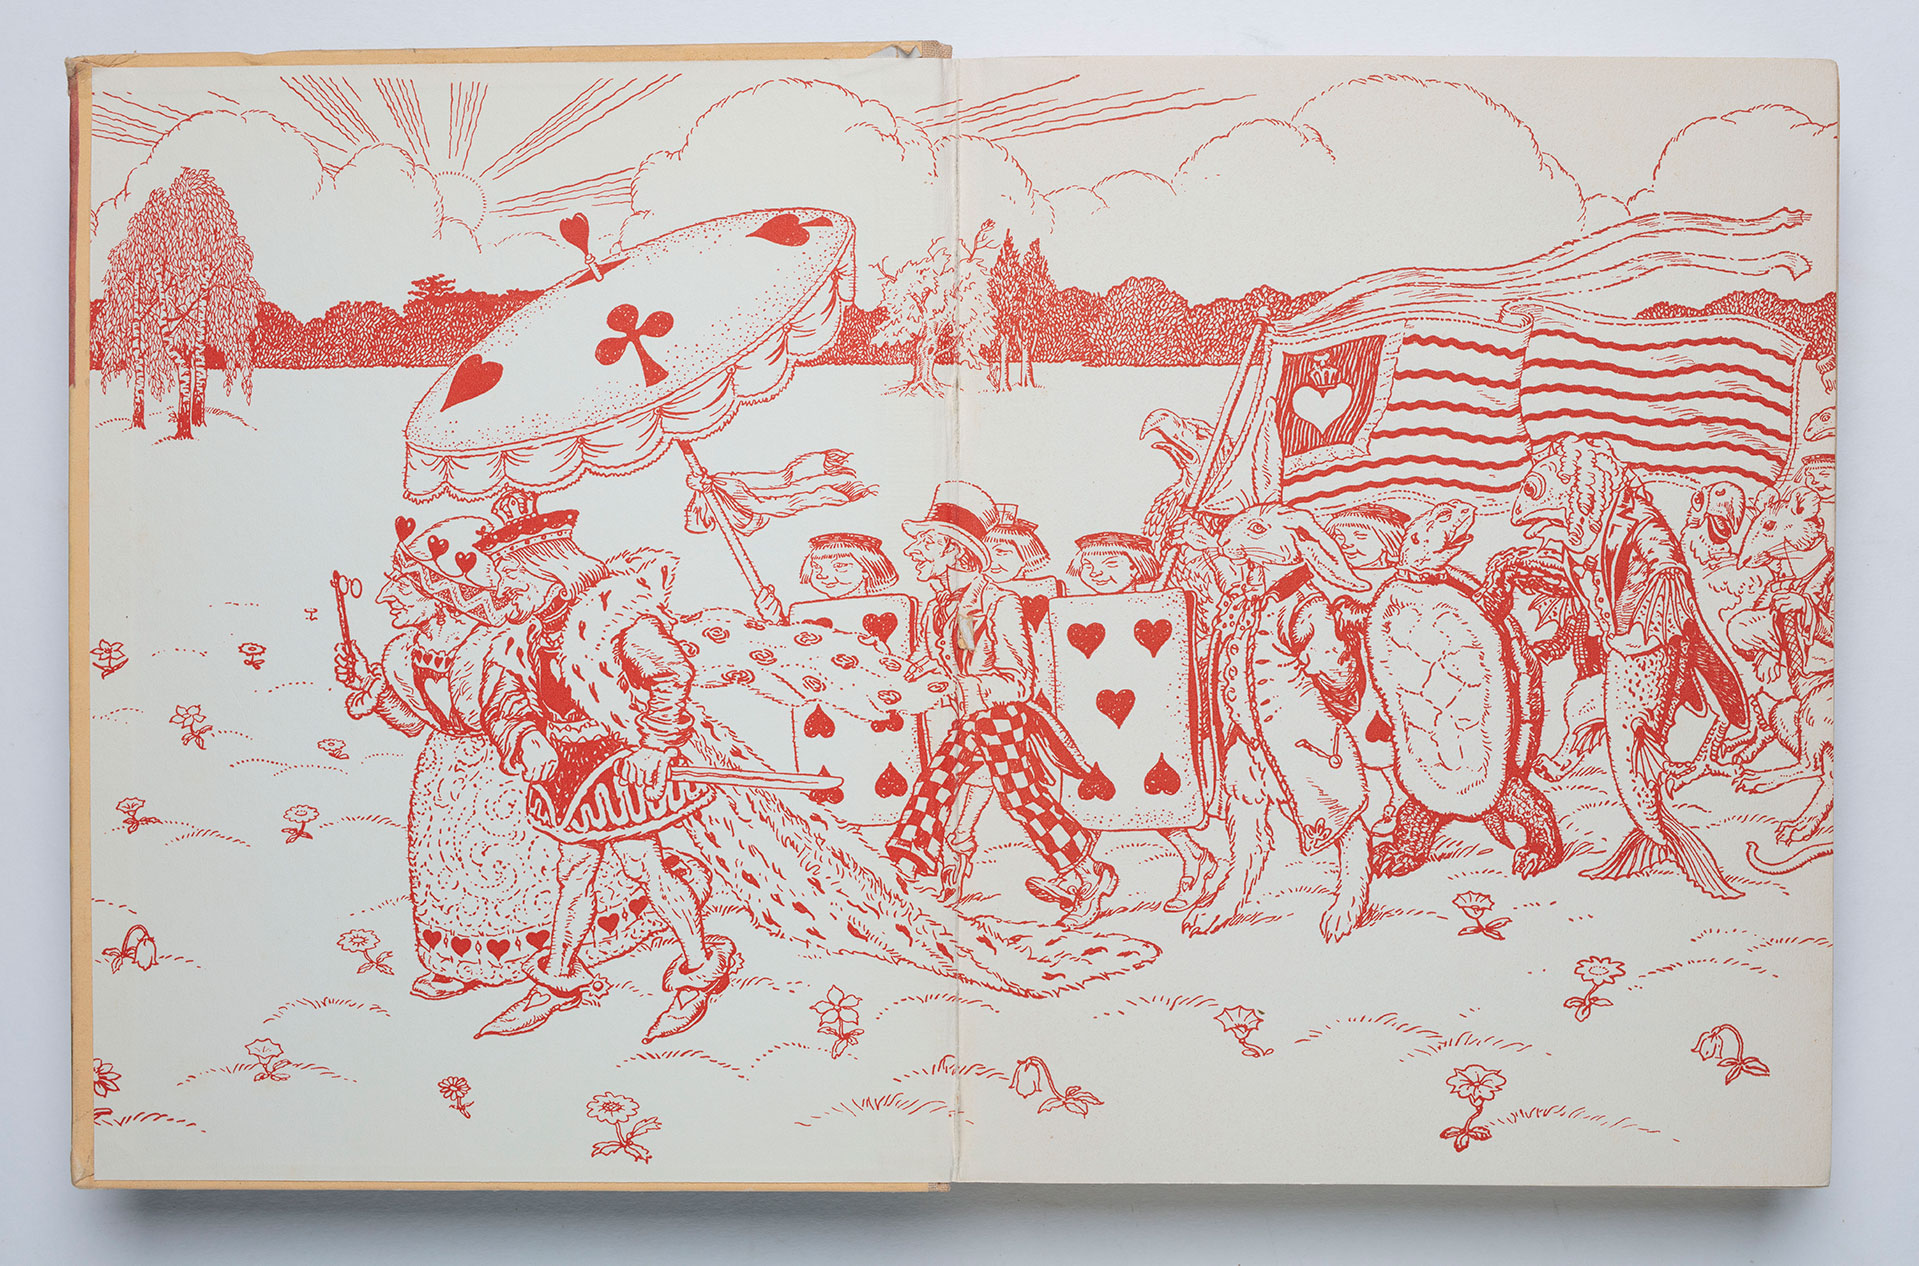 Endpapers illustrating a parade of characters from Alice in Wonderland.